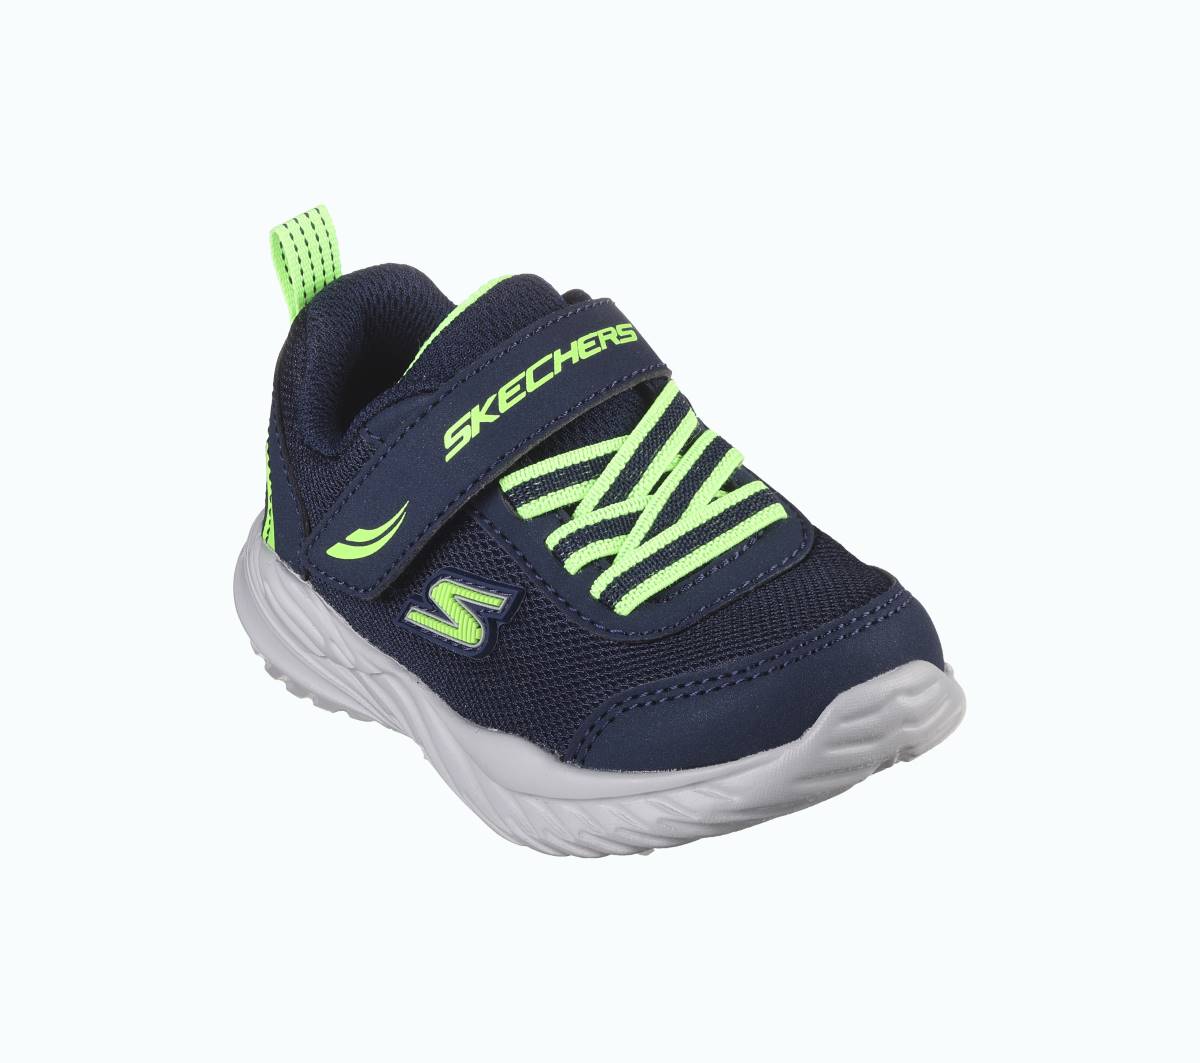 Skechers Nitro Sprint Bungee NVLM Navy Lime Kids trainers 407308N in a Plain Textile in Size 24